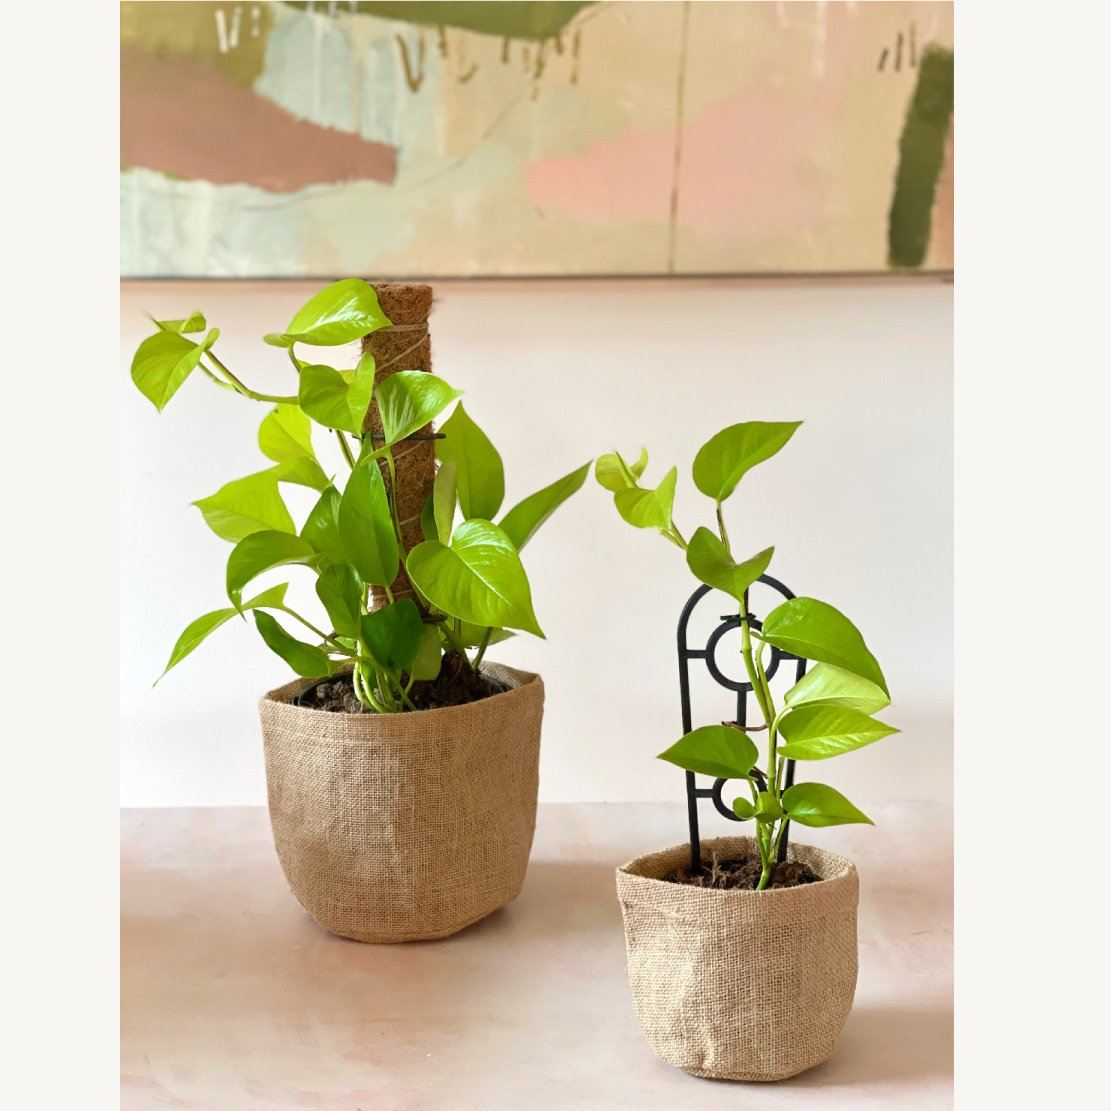 Same day gift delivery service Geelong and Melbourne | Hello Botanical | Small and Large Golden Pothos Plants Online